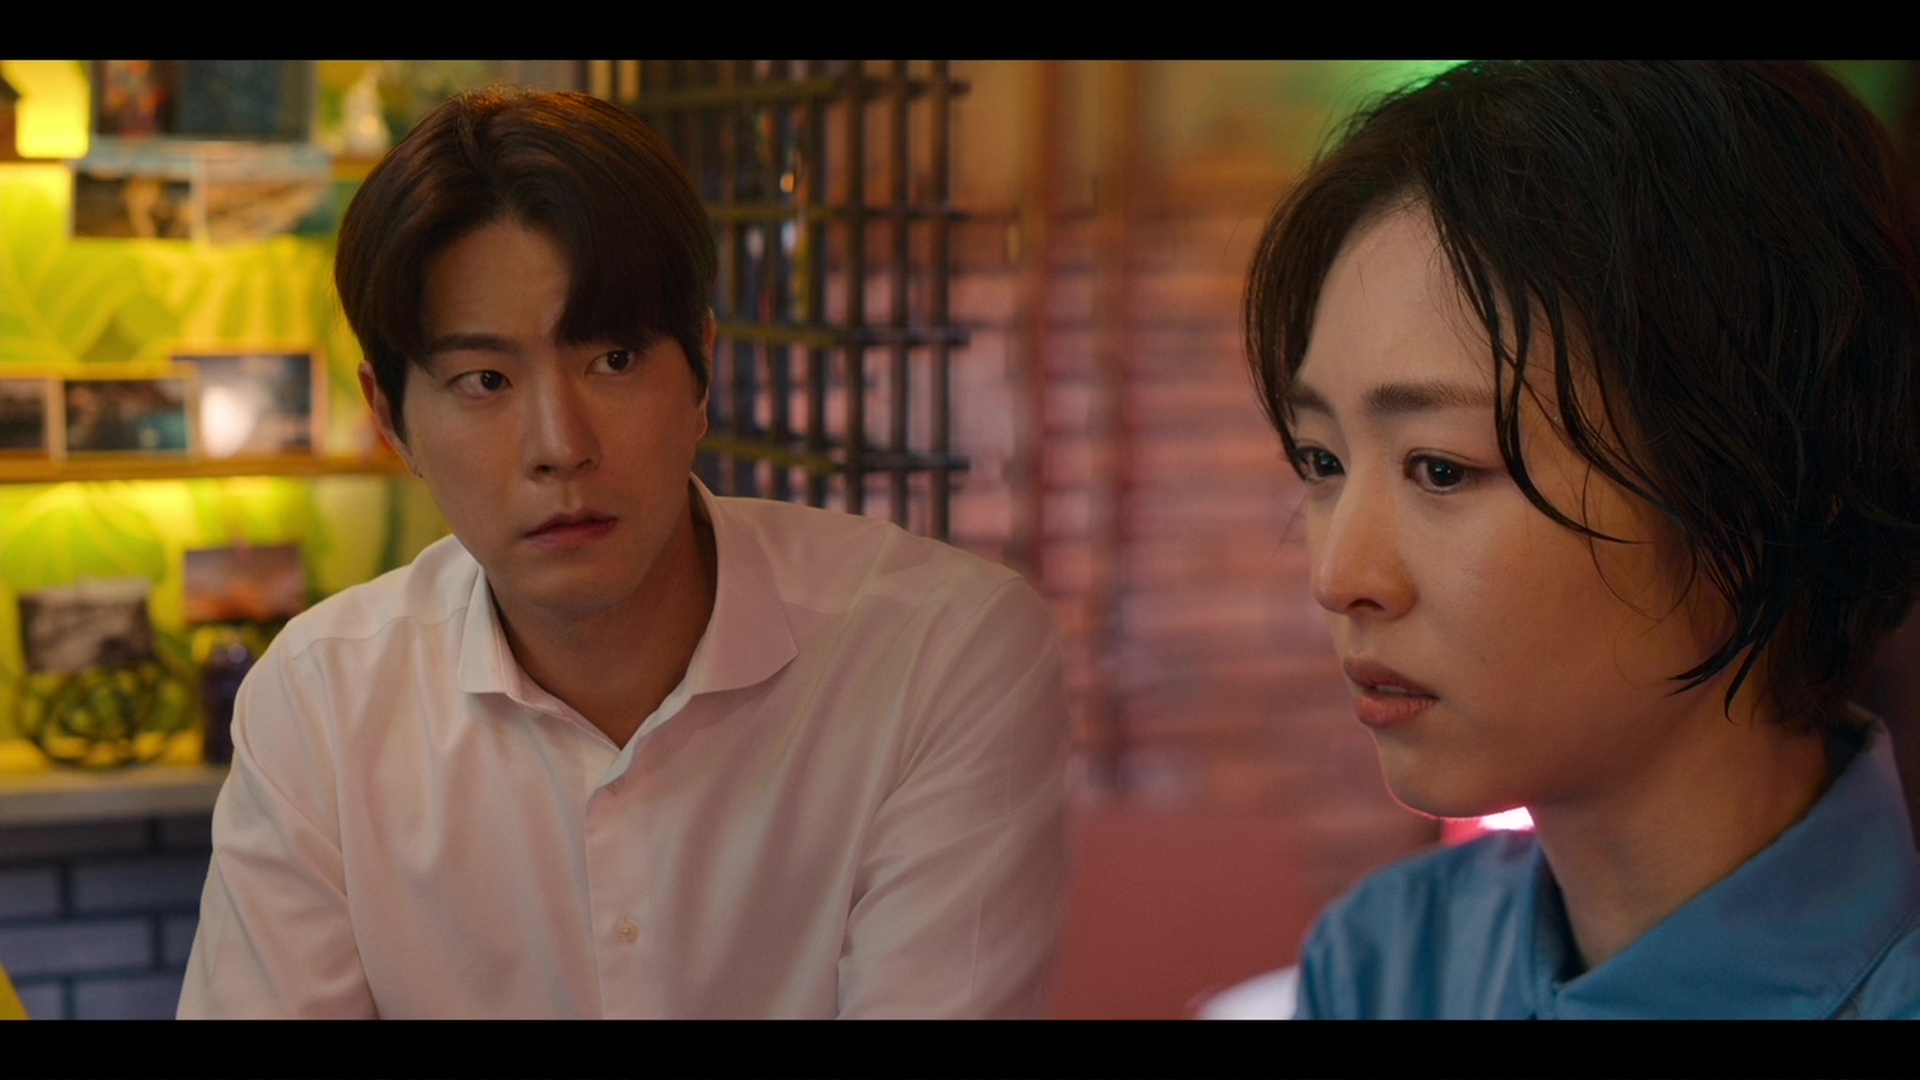 Lee Yeon-hee and Hong Jong-hyun in Race: Episodes 1-2